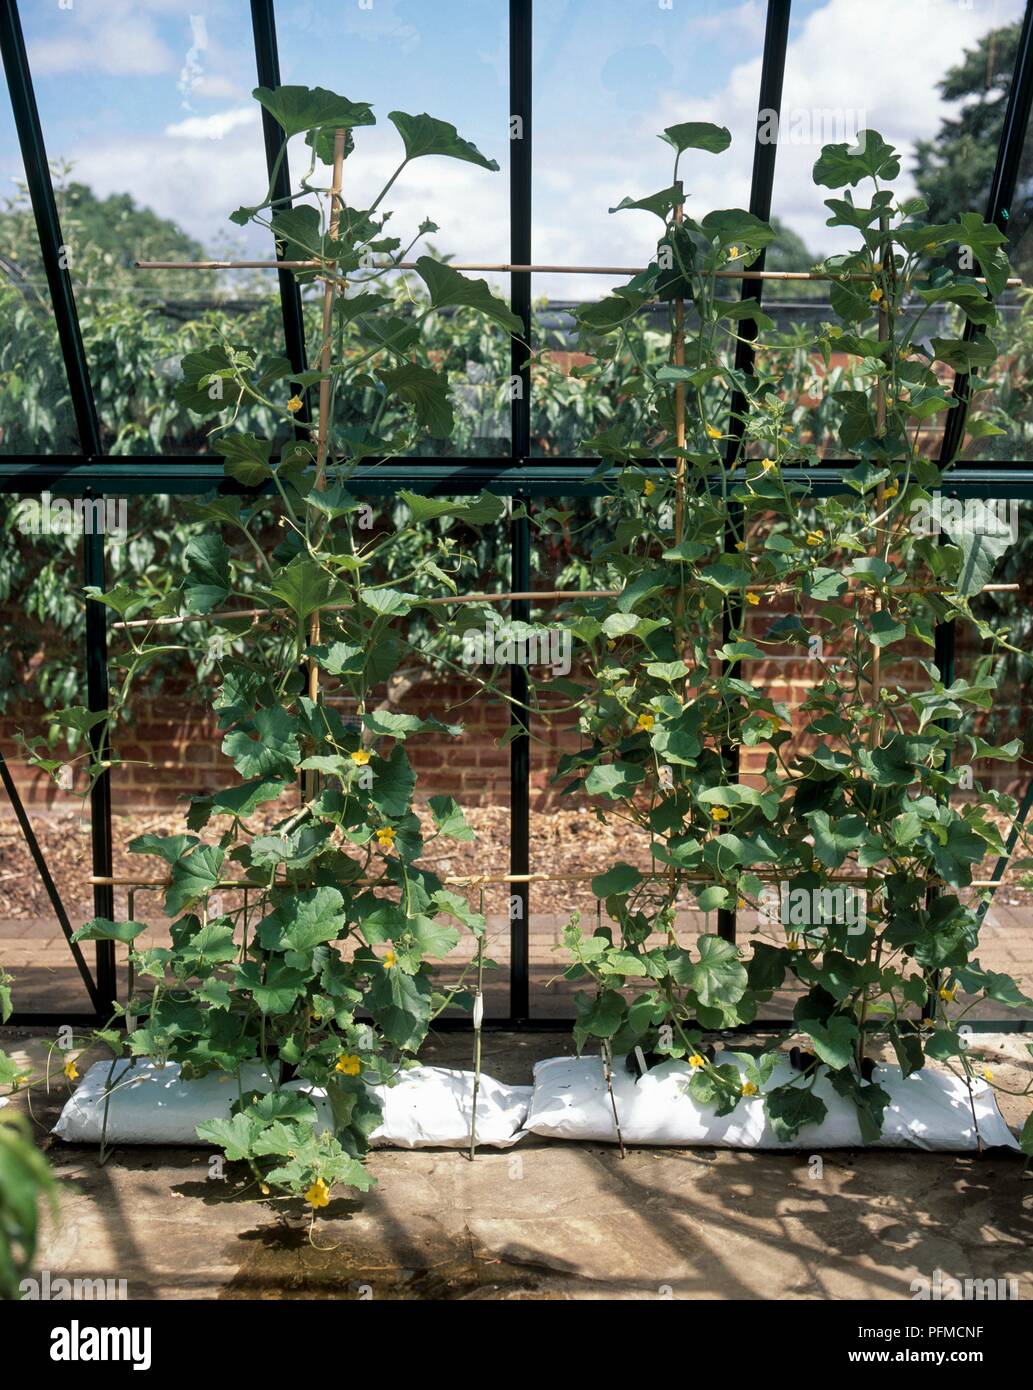 Cucumis melo 'First Break' and Cucumis melo 'Minnesota Midget' (Melons) in growing bags in a greenhouse Stock Photo